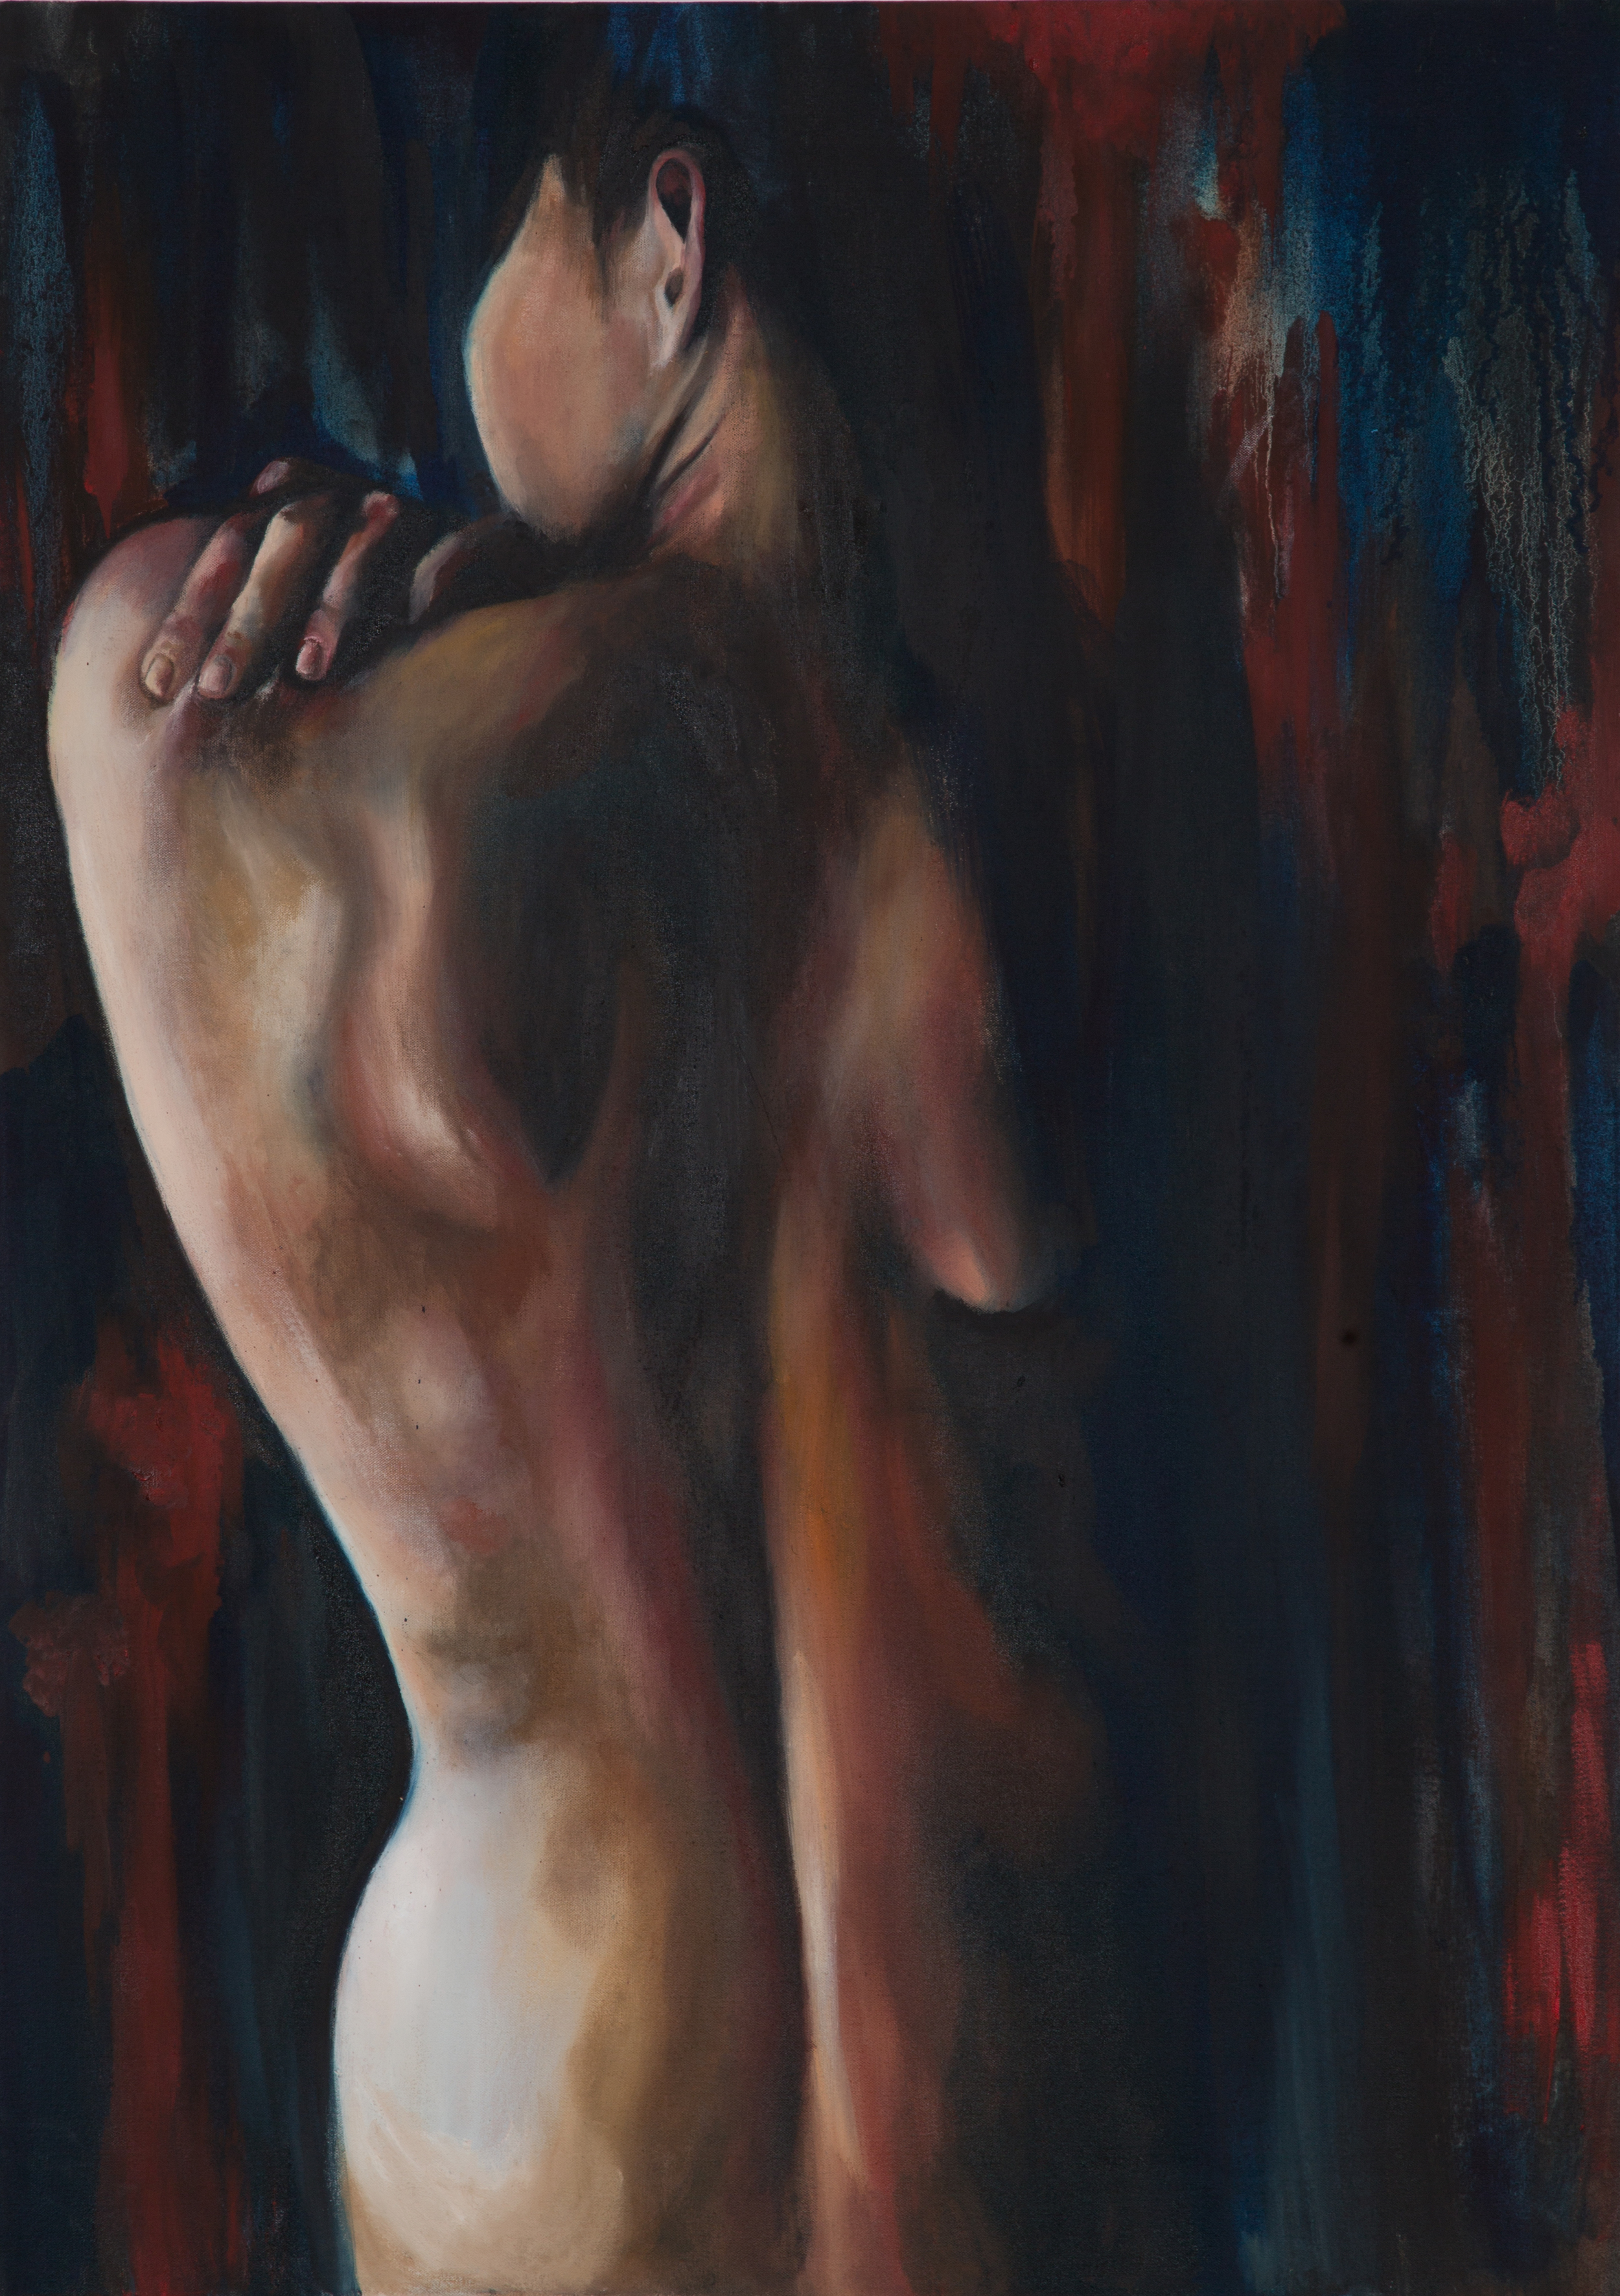   Back,  2014  Oil on canvas 